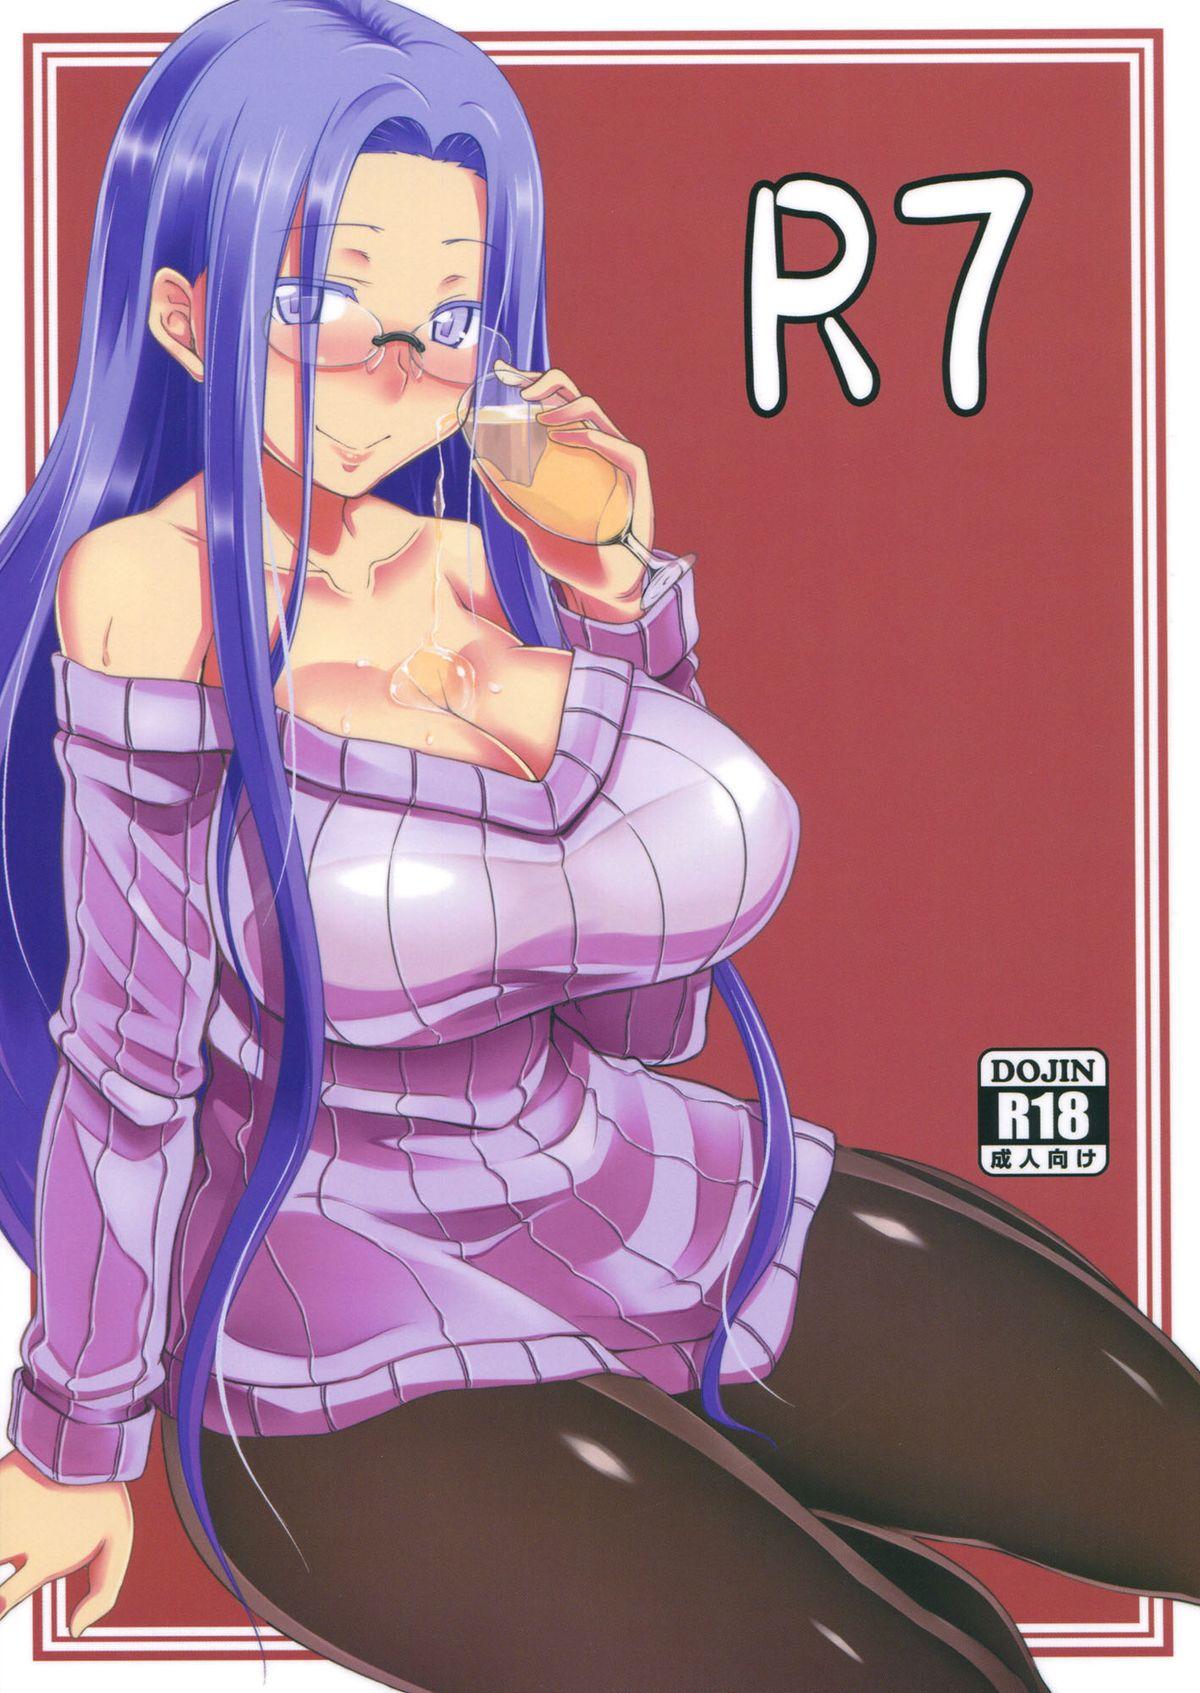 Face Fucking R7 - Fate stay night Fate hollow ataraxia Stepbrother - Picture 1